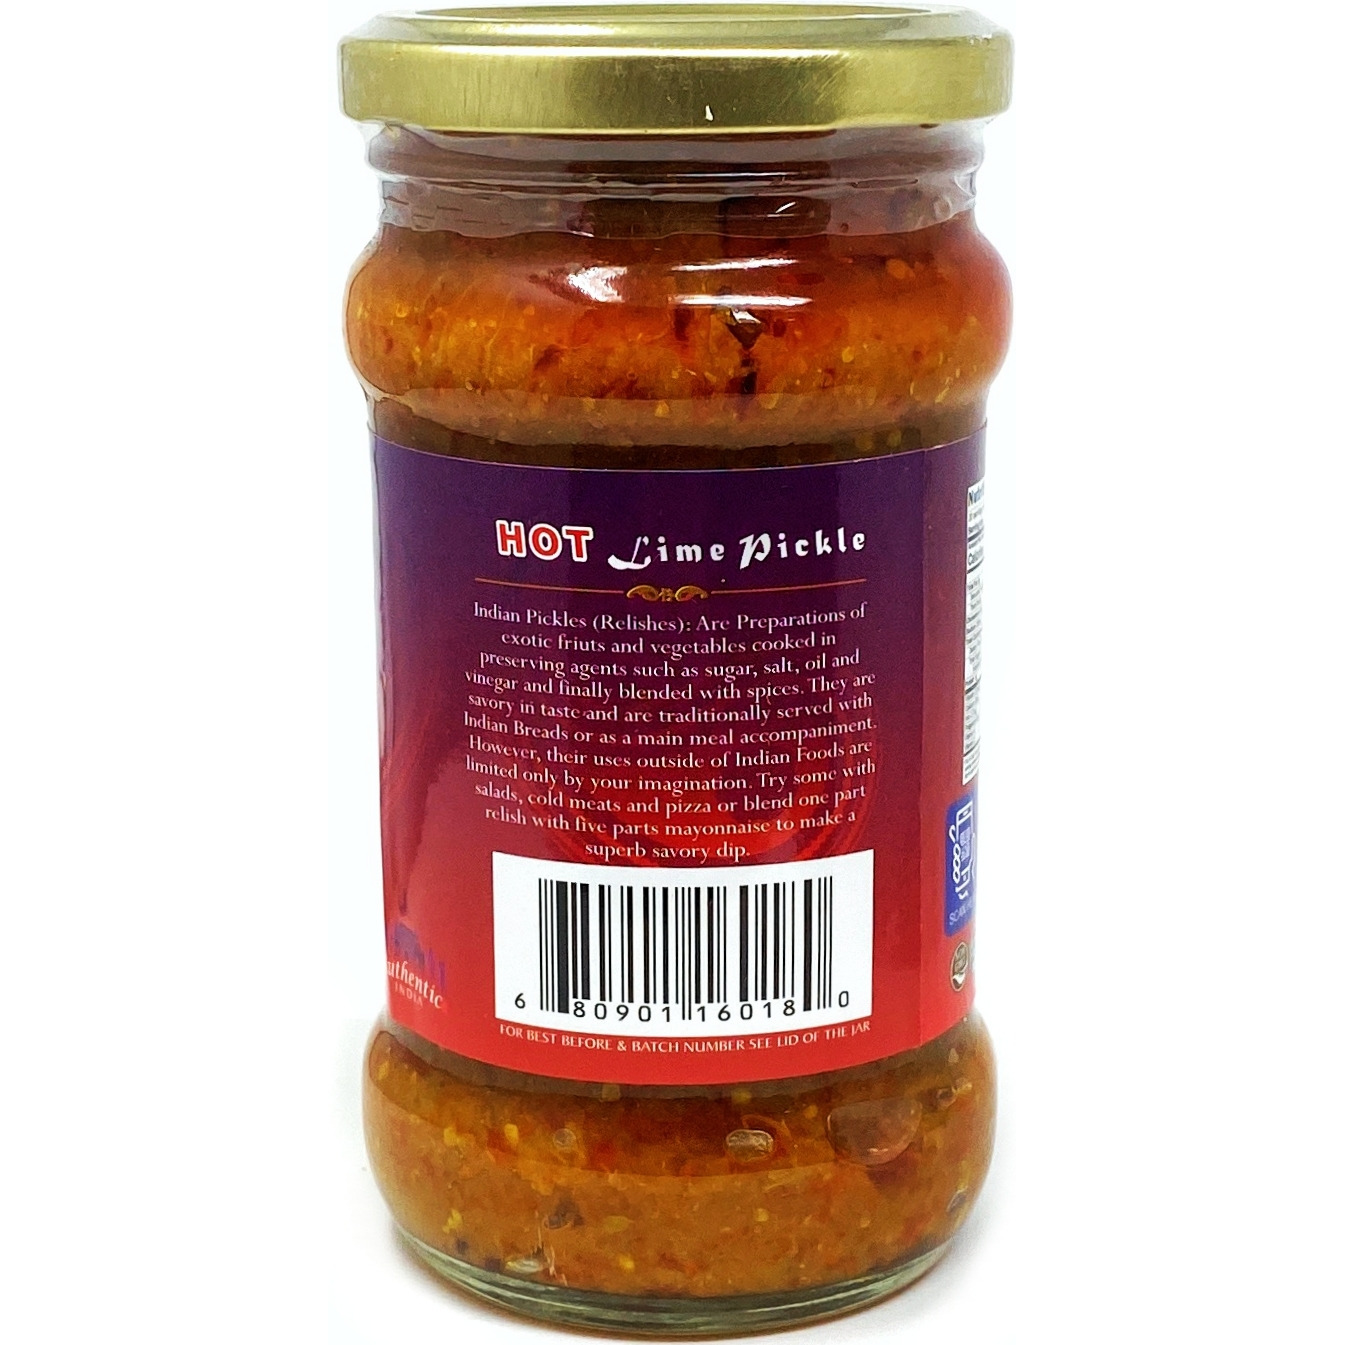 Rani Lime Pickle Hot (Achar, Spicy Indian Relish) 10.5oz (300g) ~ Glass Jar, All Natural | Vegan | Gluten Free | NON-GMO | No Colors | Popular Indian Condiment, Indian Origin